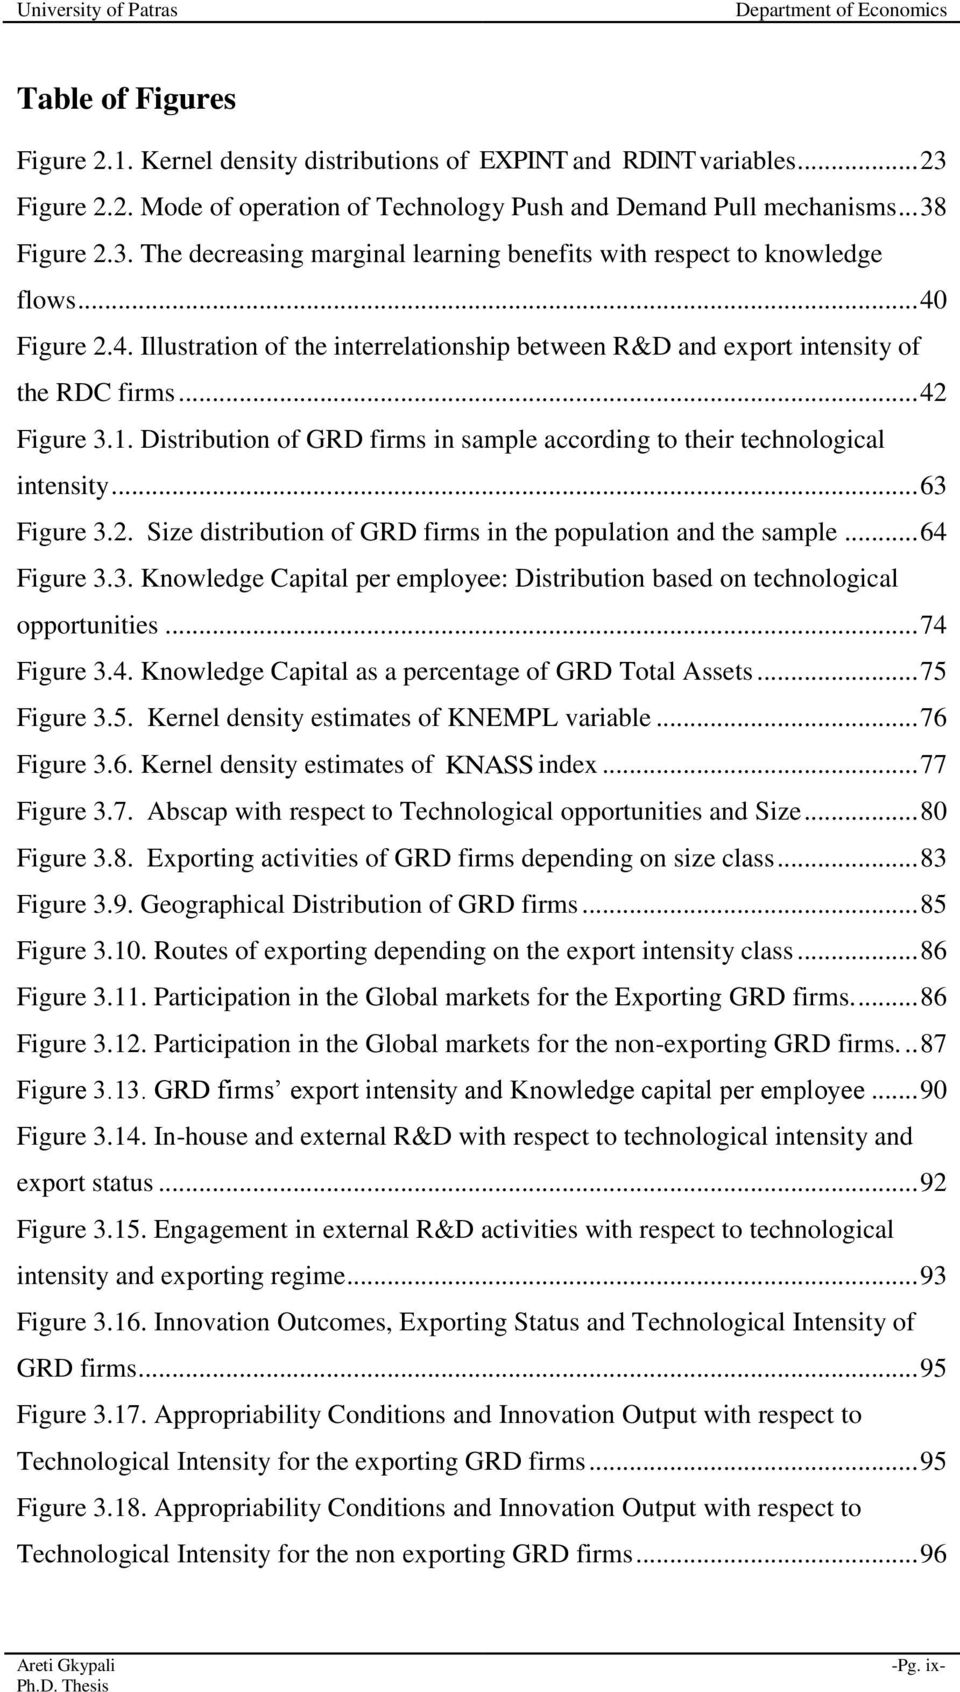 Distribution of GRD firms in sample according to their technological intensity... 63 Figure 3.2. Size distribution of GRD firms in the population and the sample... 64 Figure 3.3. Knowledge Capital per employee: Distribution based on technological opportunities.